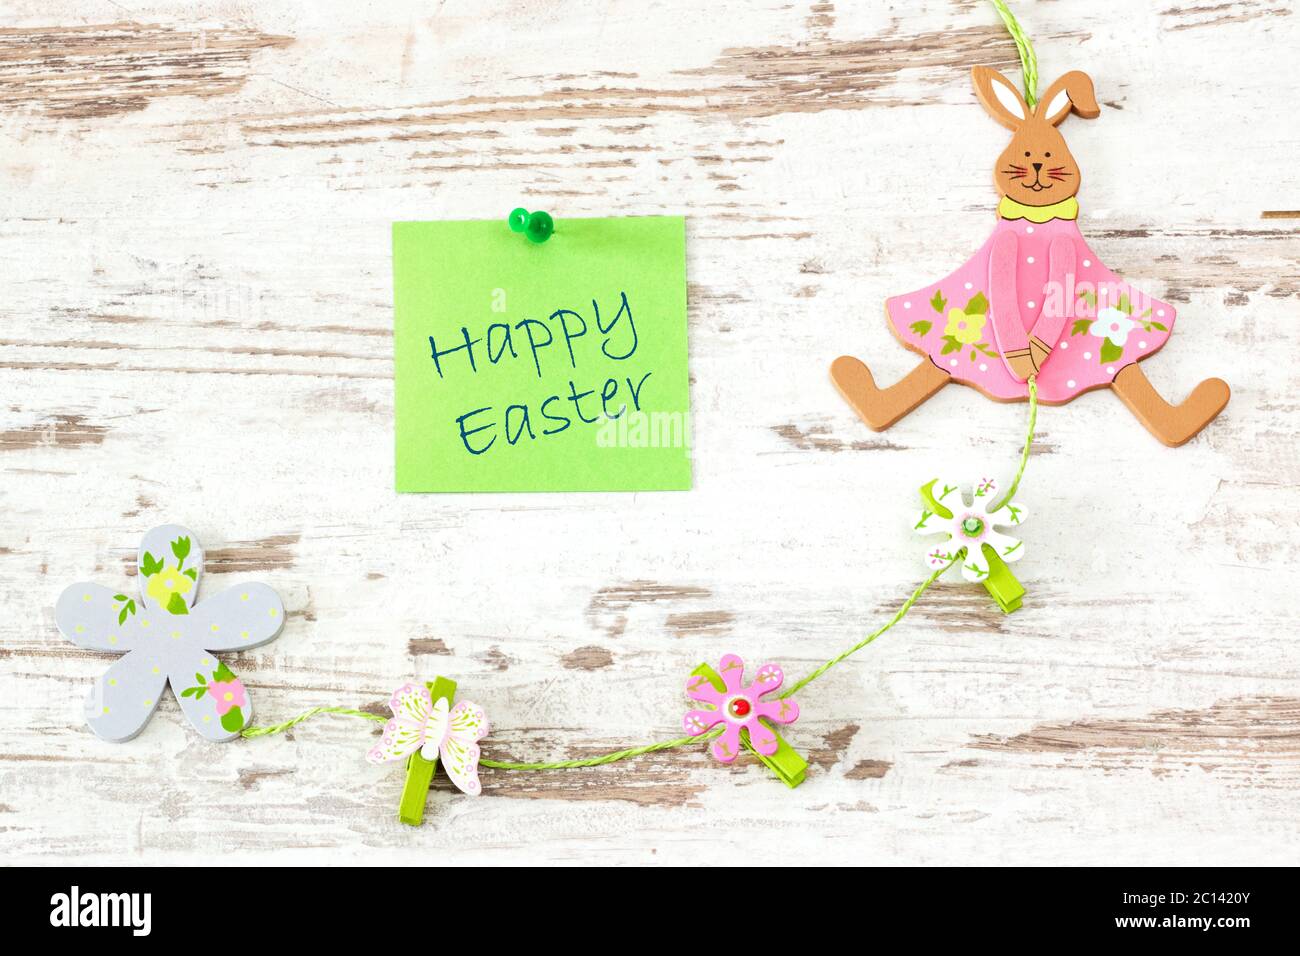 easter greetings on wooden background Stock Photo